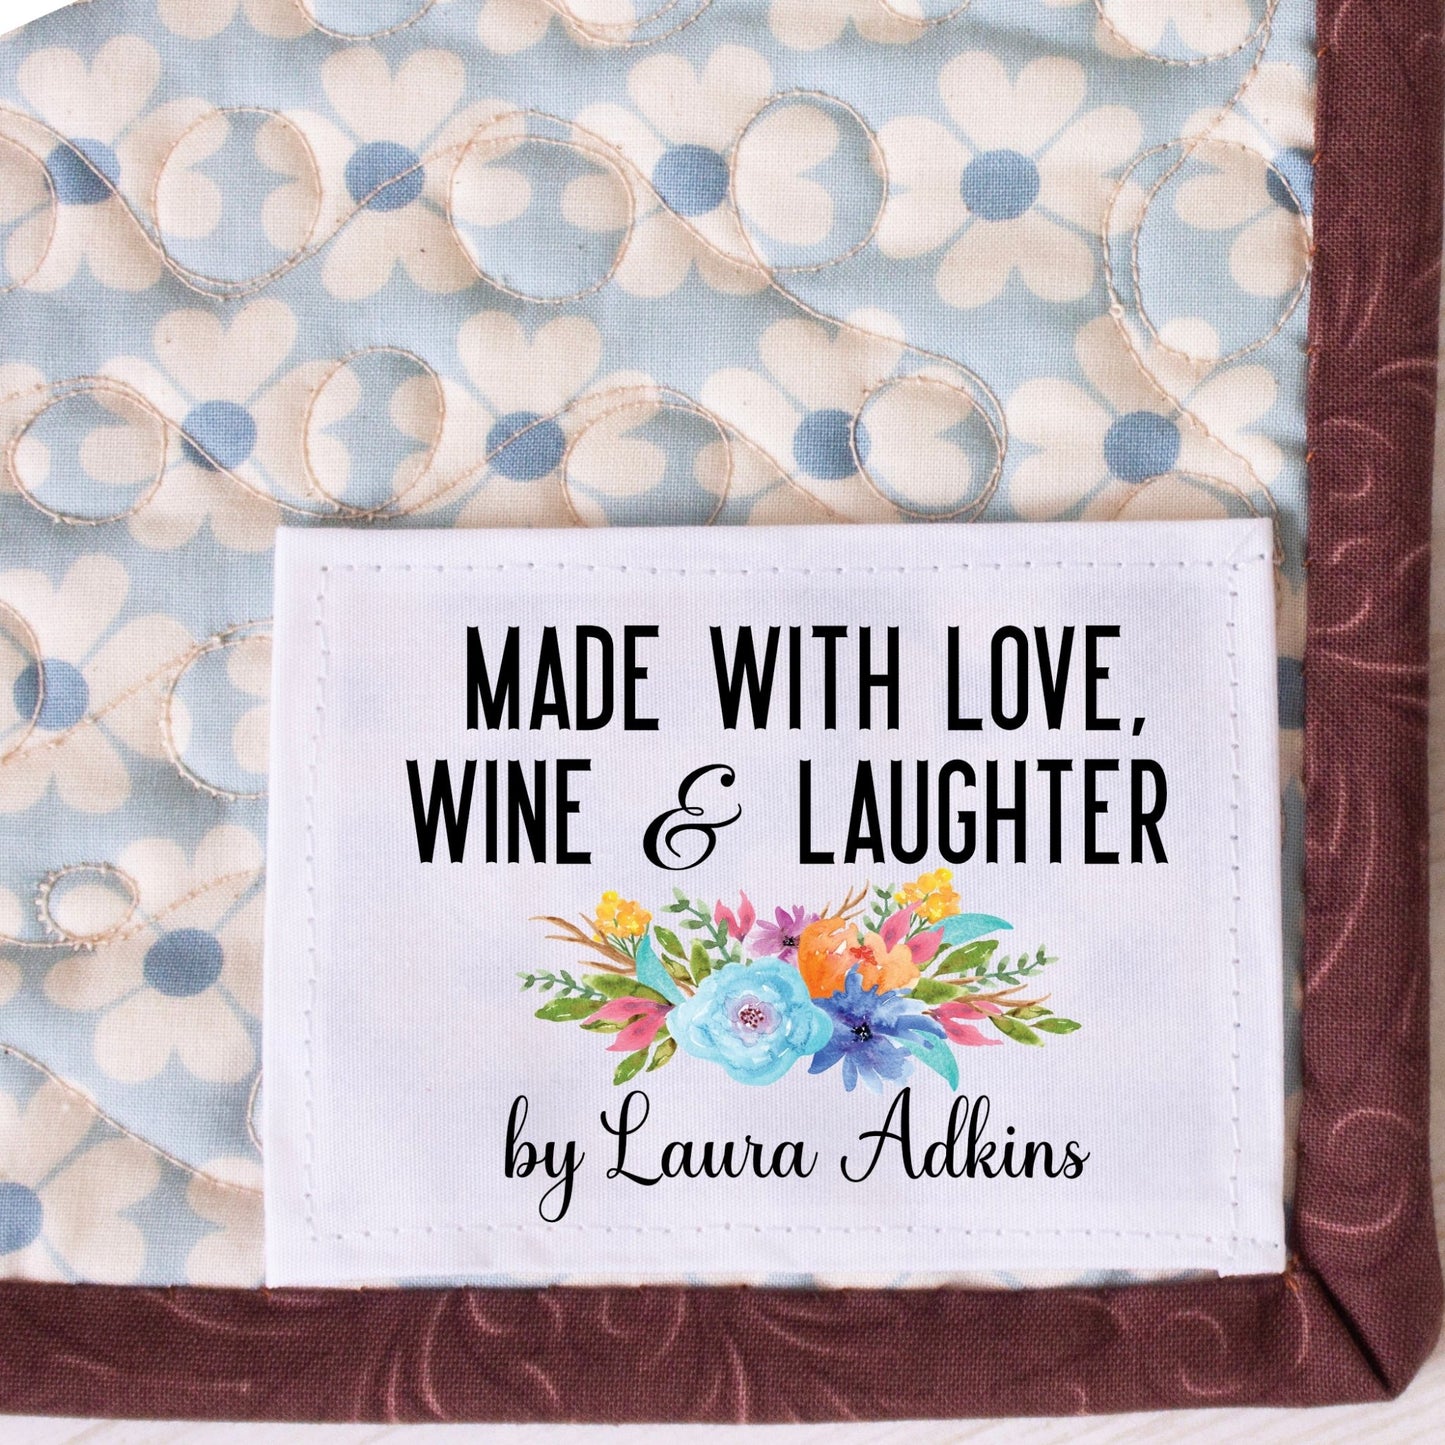 Funny Quilt Labels Love, Wine & Laughter - Jammin Threads